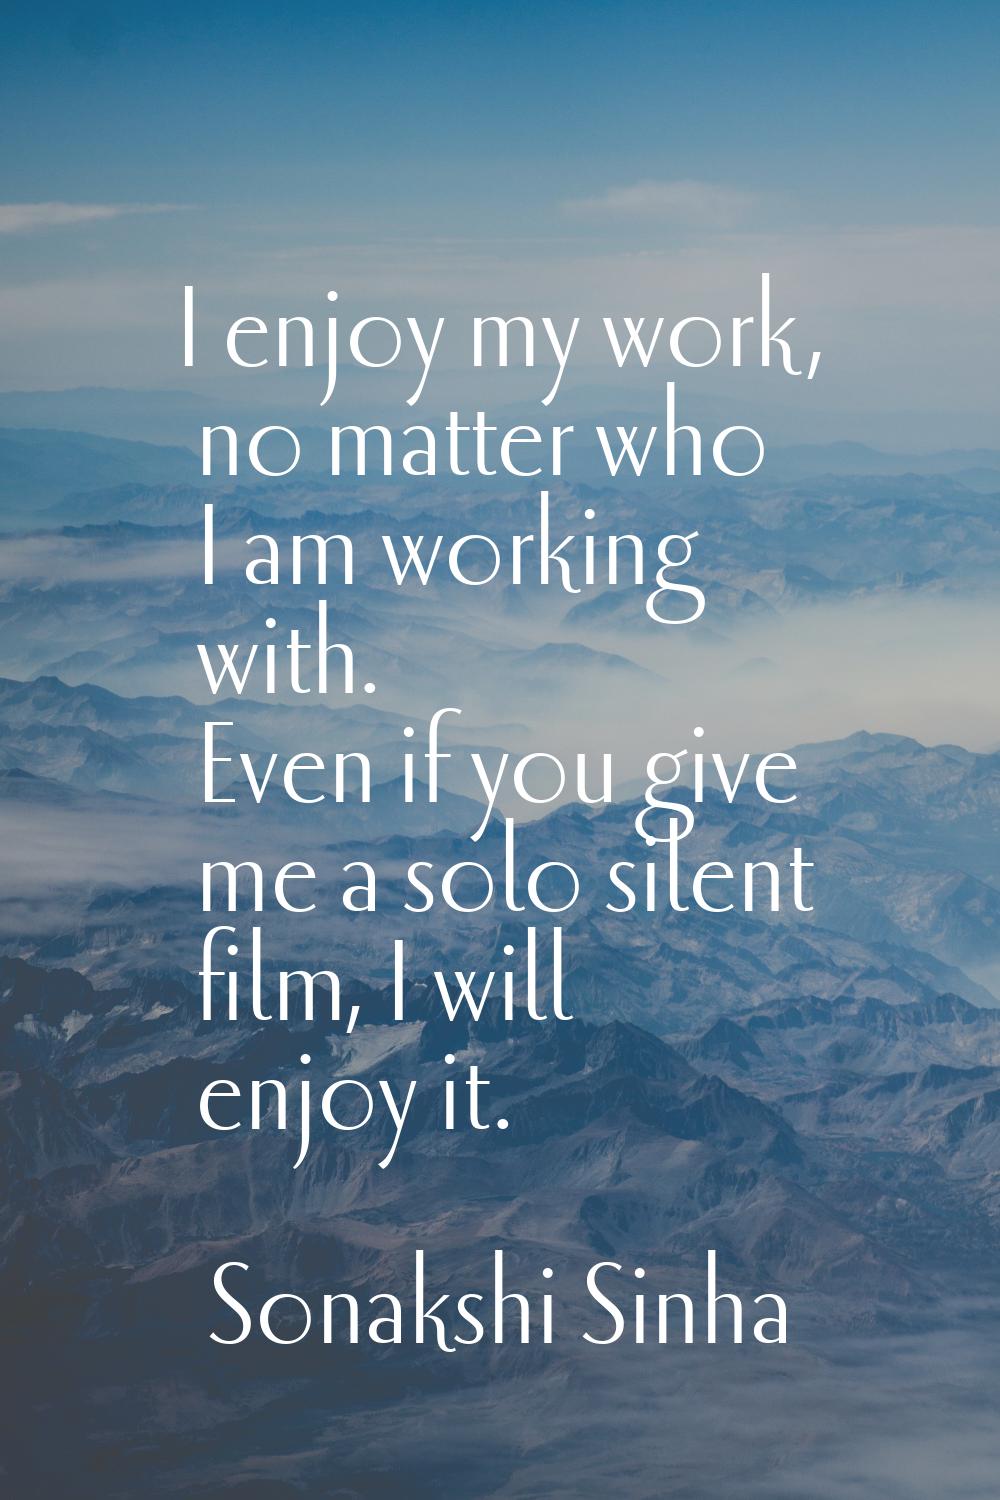 I enjoy my work, no matter who I am working with. Even if you give me a solo silent film, I will en